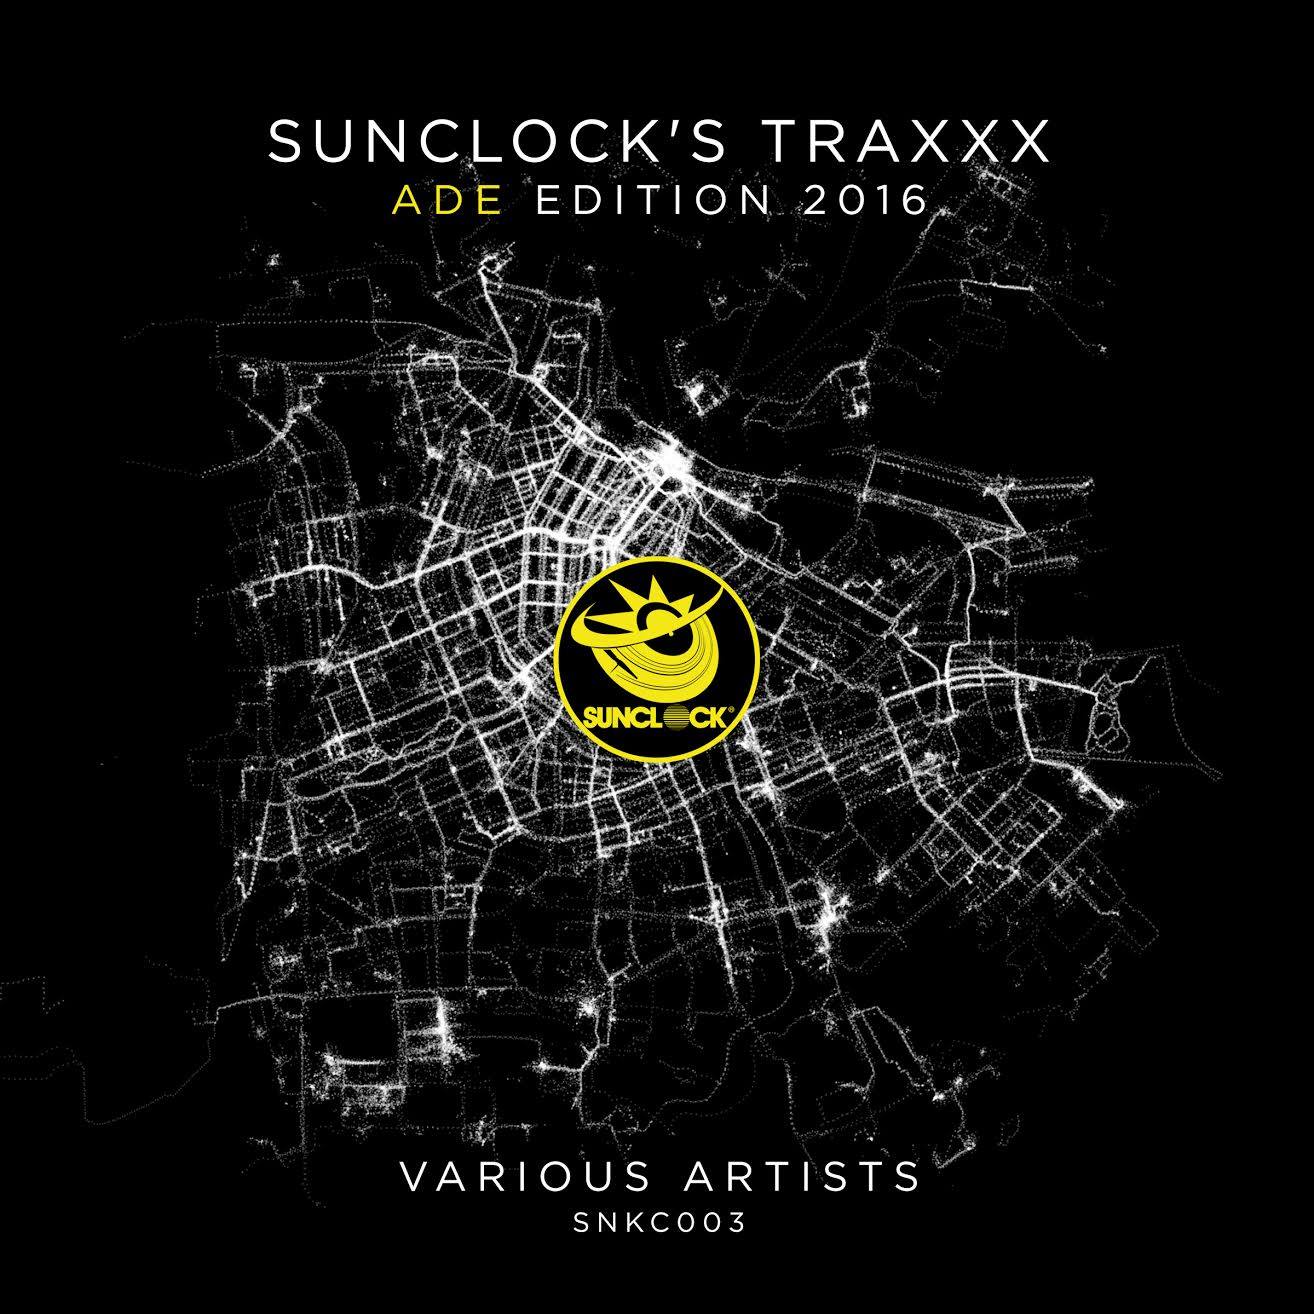 Various Artists - Sunclock's Traxxx ADE Edition 2016 Cover